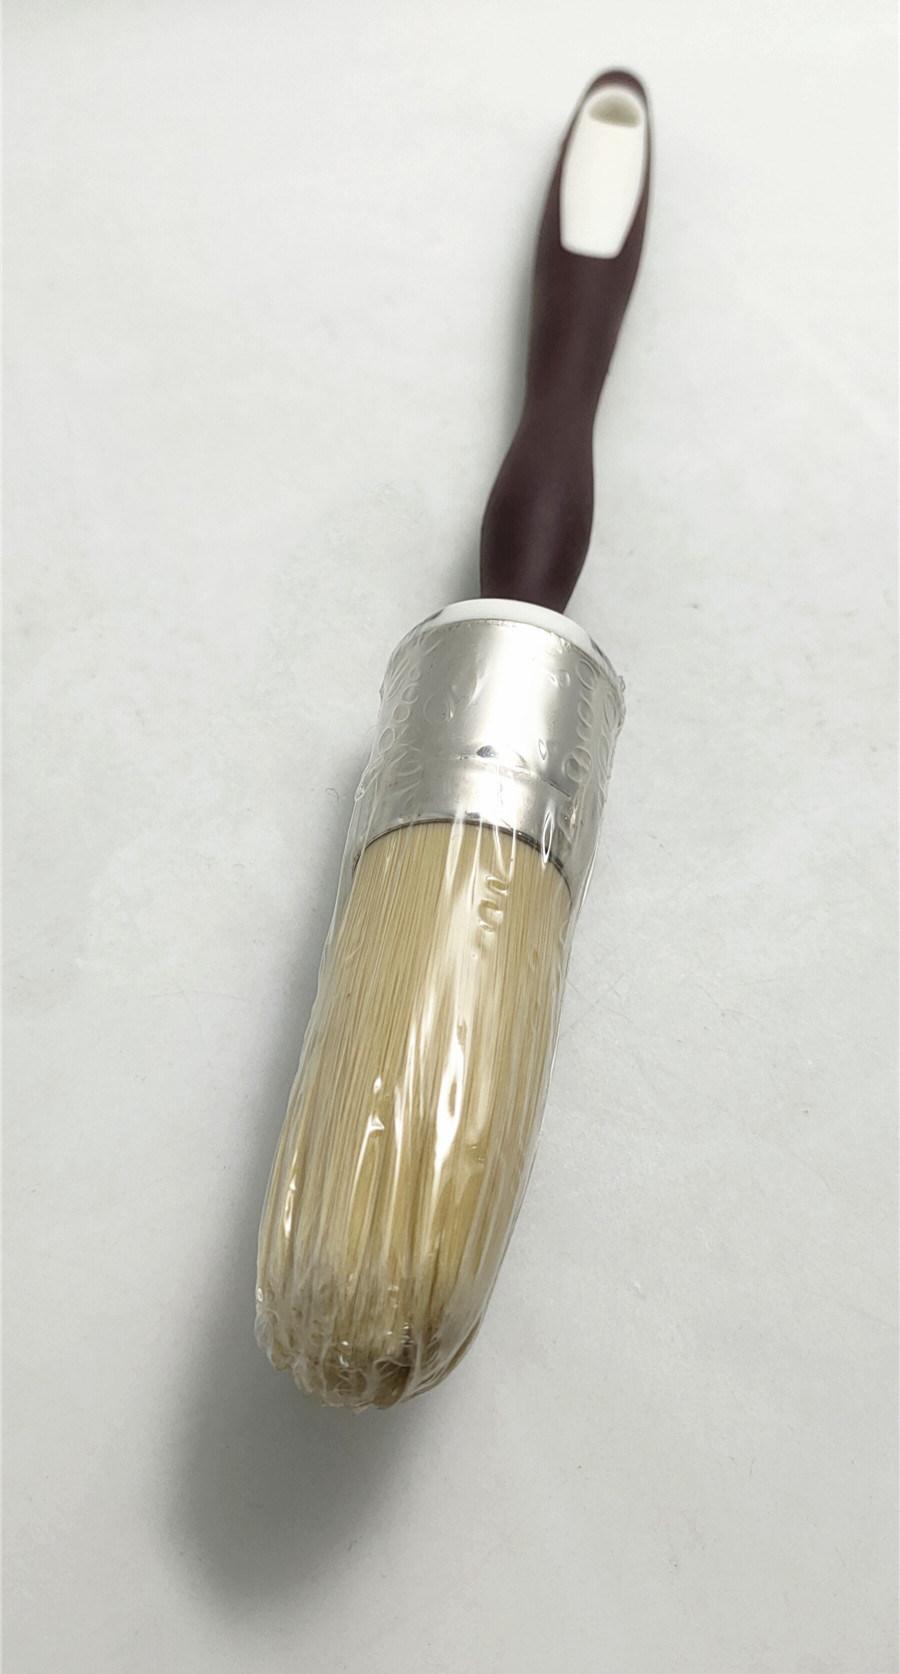 Professional Appearance Round Rubber Handle Paint Brush